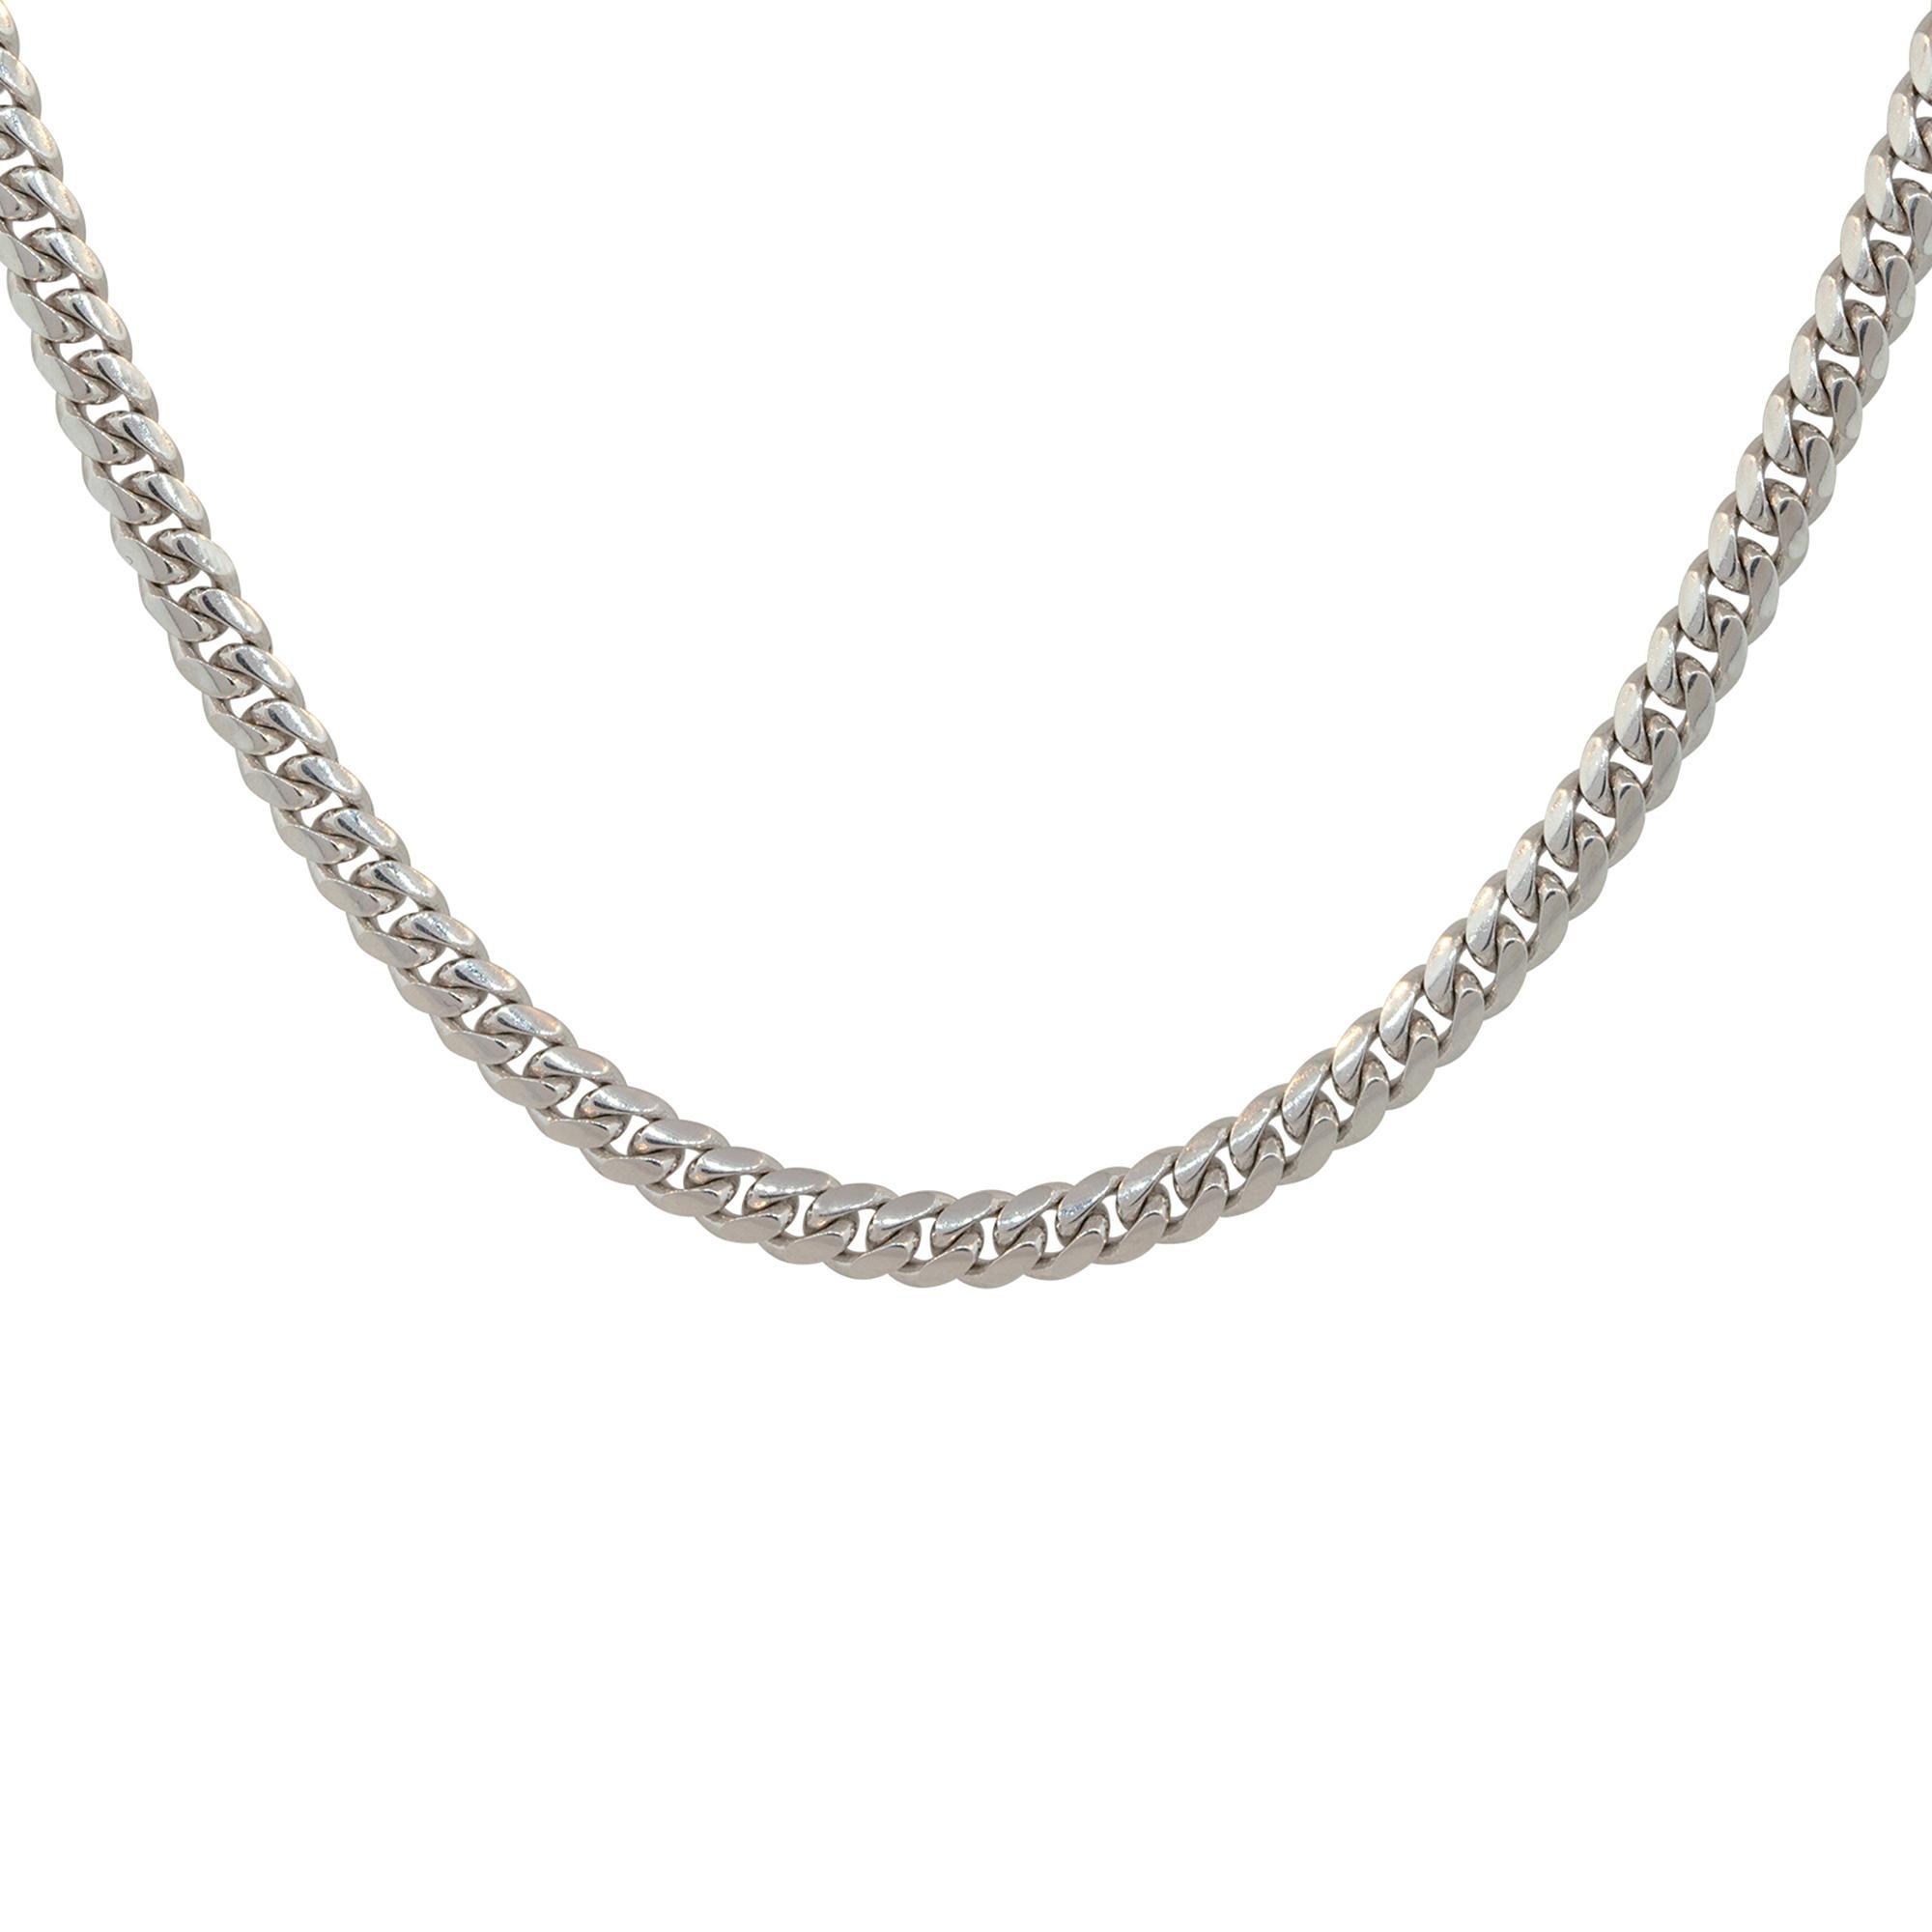 14k White Gold 24″ Men's 4mm Miami Cuban Link Chain

Material: 14k White Gold
Measurements: Necklace Measures 24″ in Length and 4mm in Thickness
Fastening: Spring Ring Clasp
Item Weight: 29.9g (19.2dwt)
Additional Details: This item comes with a